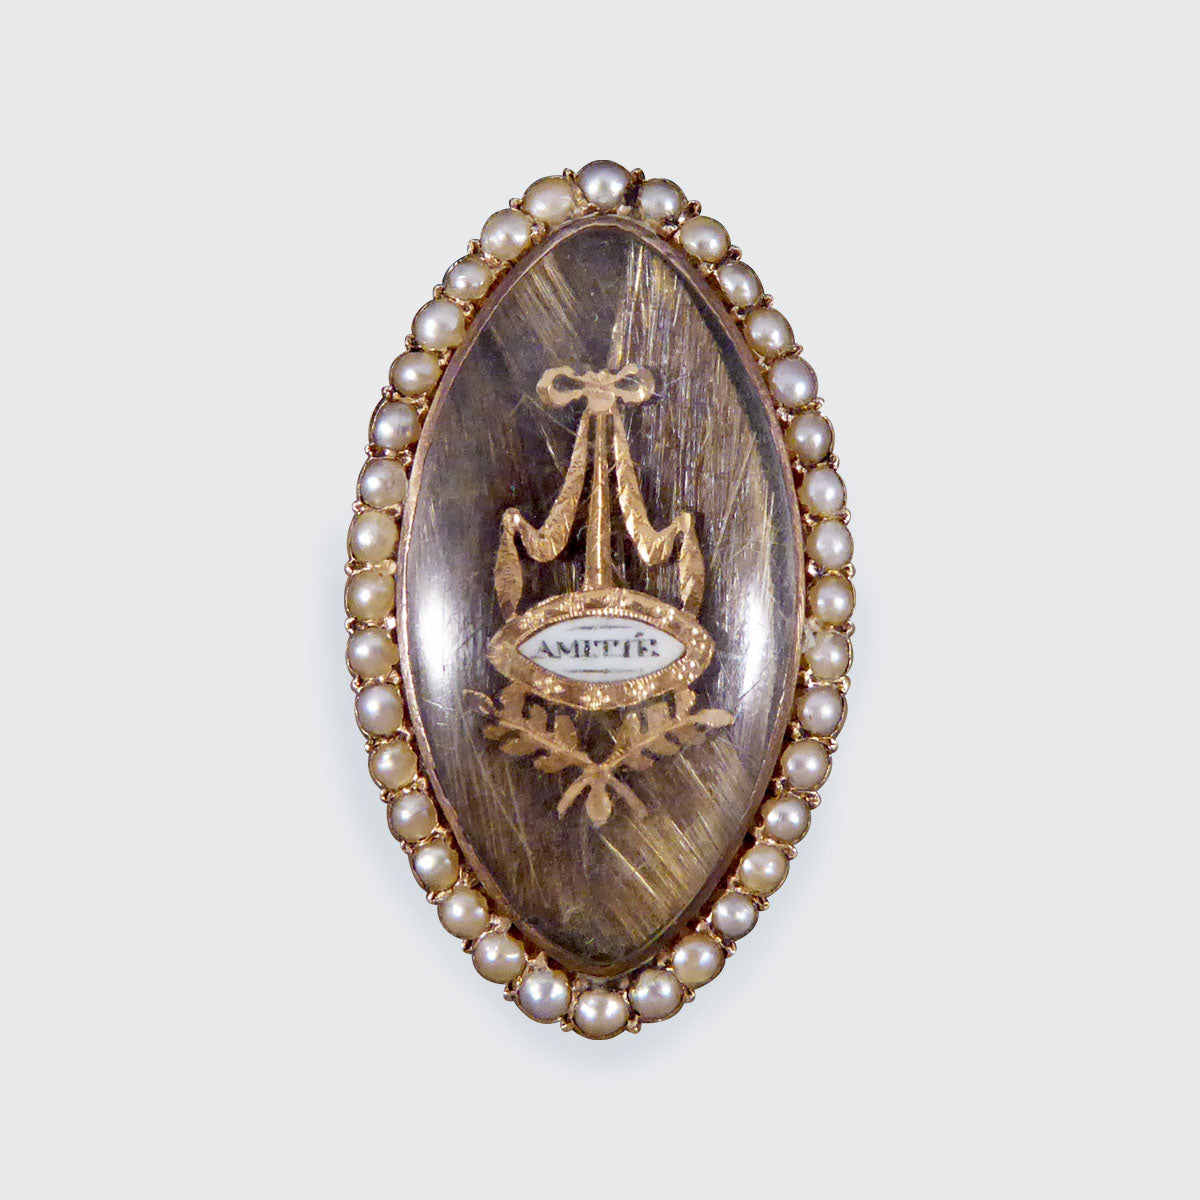 Antique Georgian Amitie Marquise Shaped Seed Pearl Memorial Ring with Platted Hair in Gold